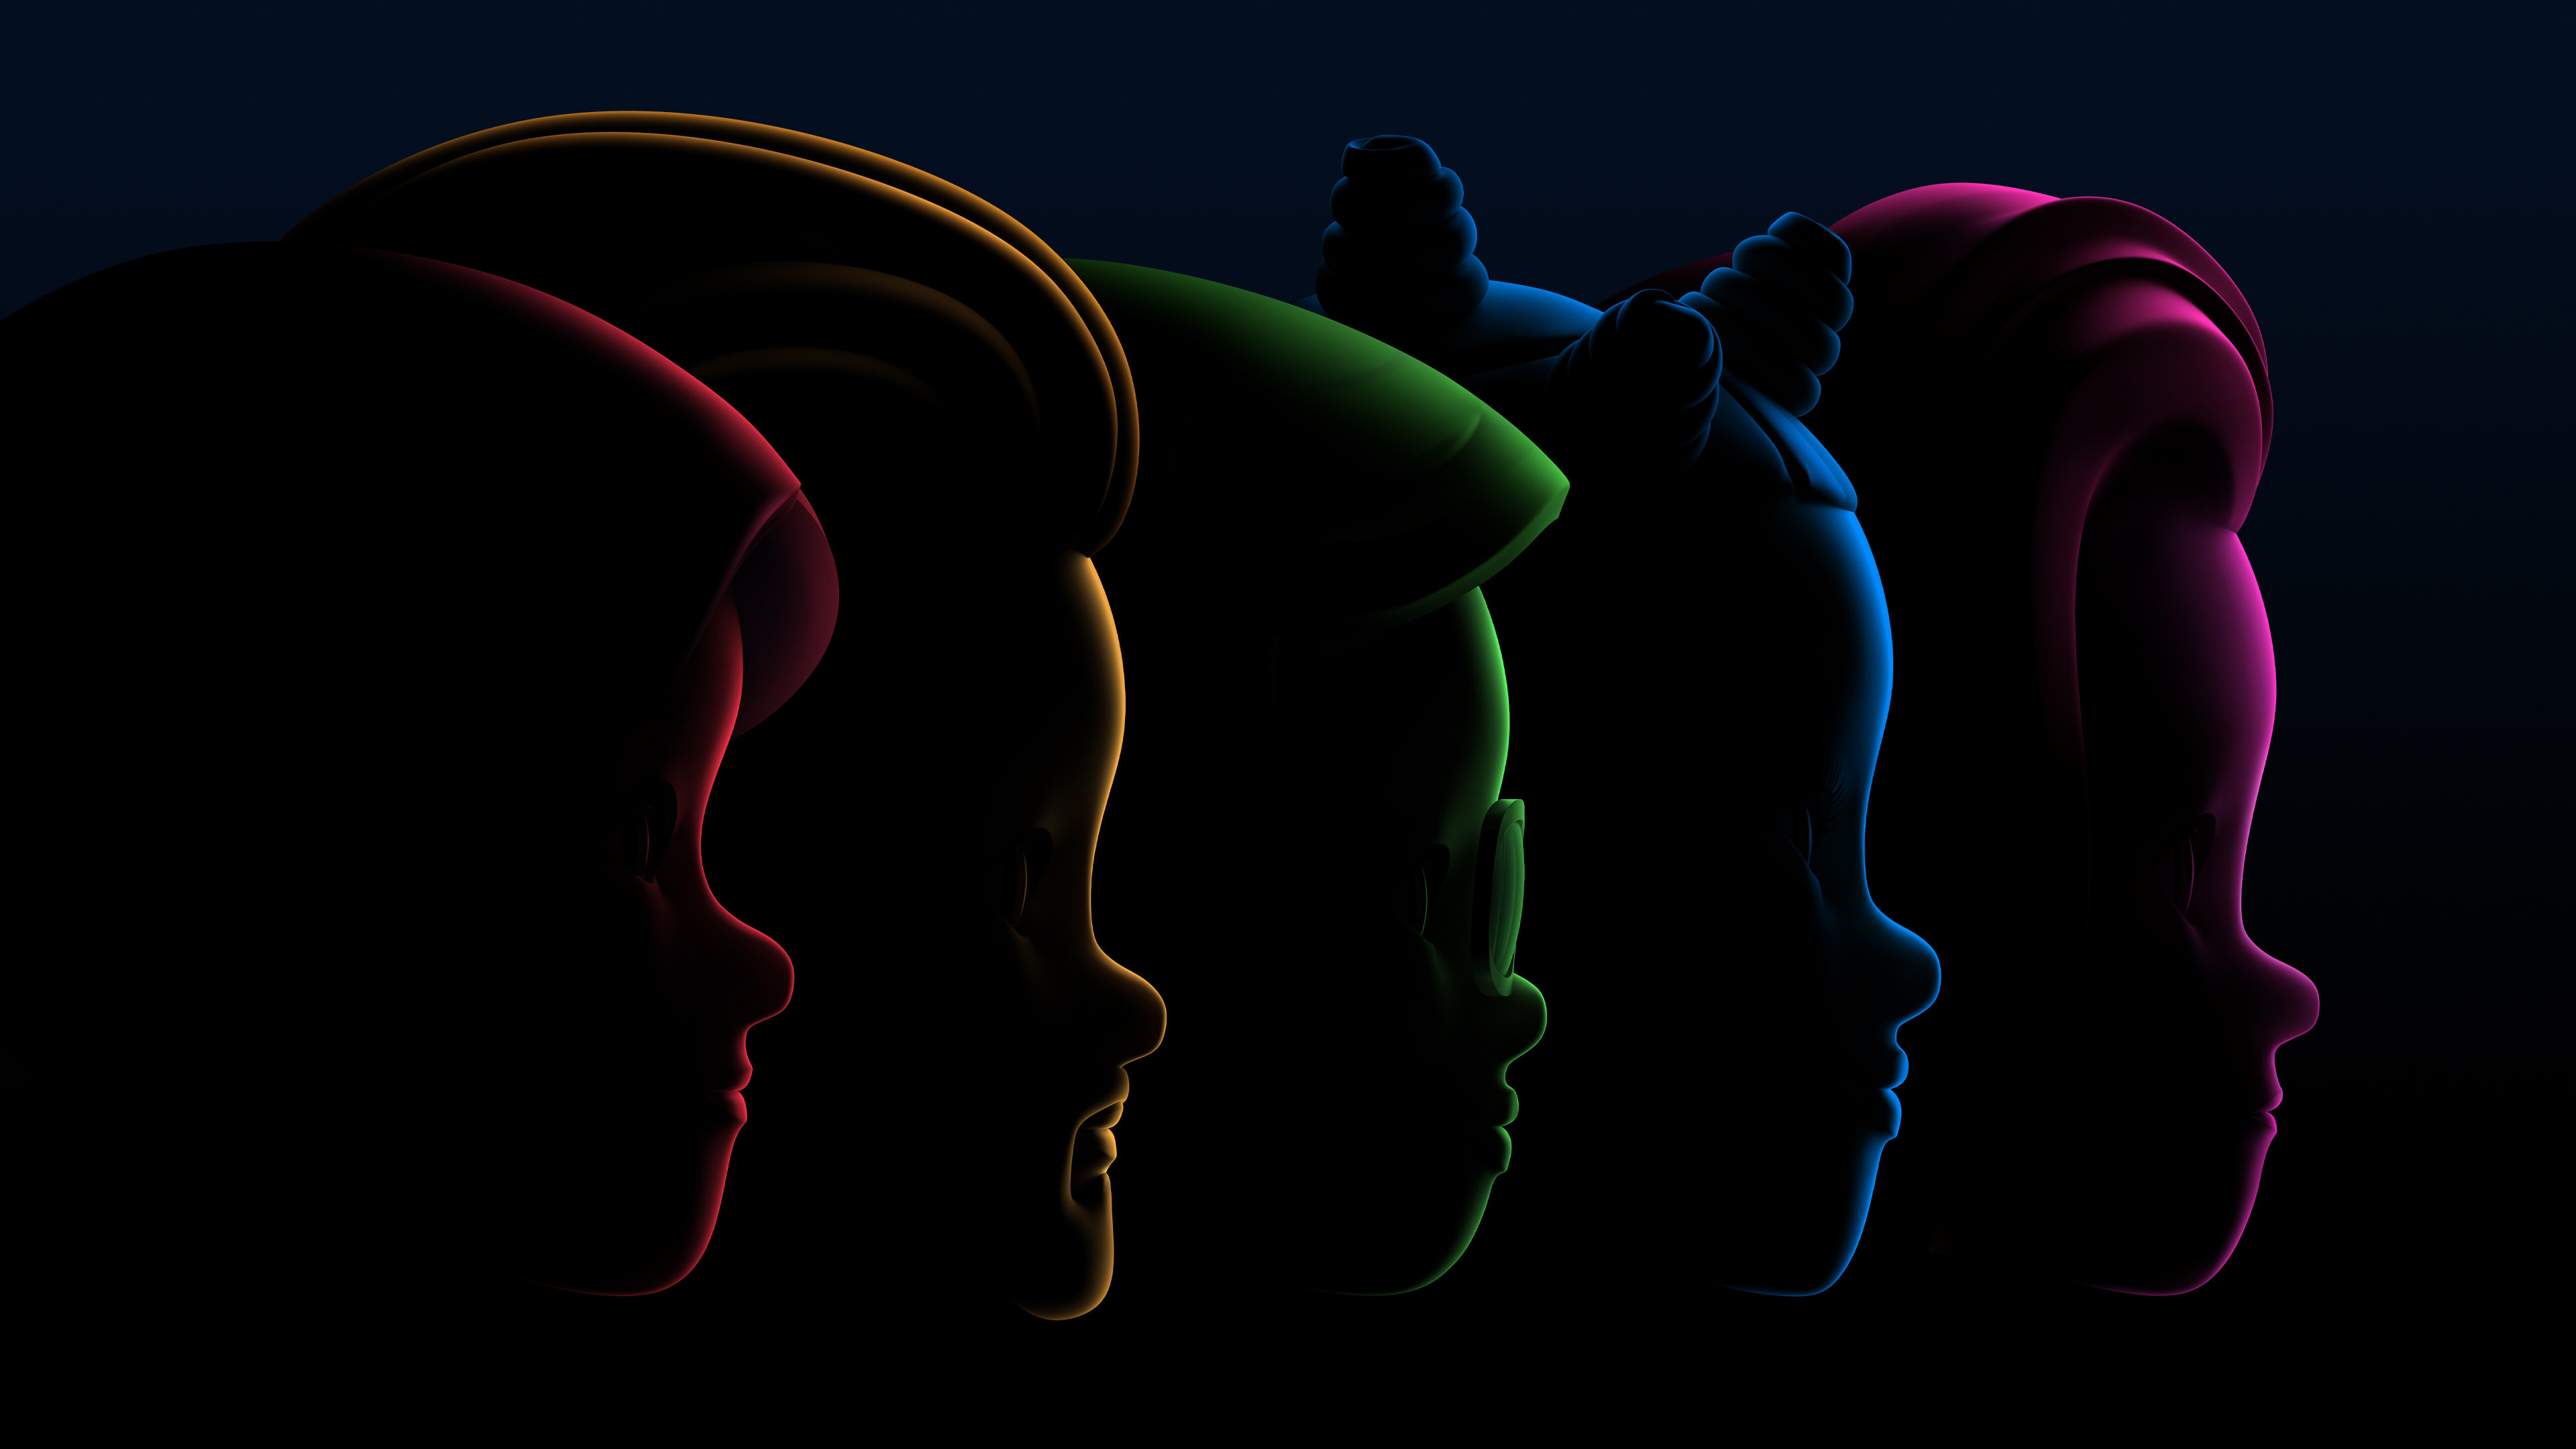 Apple's marketing image showing five Memoji head silhouettes set against a black background, designed to promote WWDC22 (this year's developer conference)